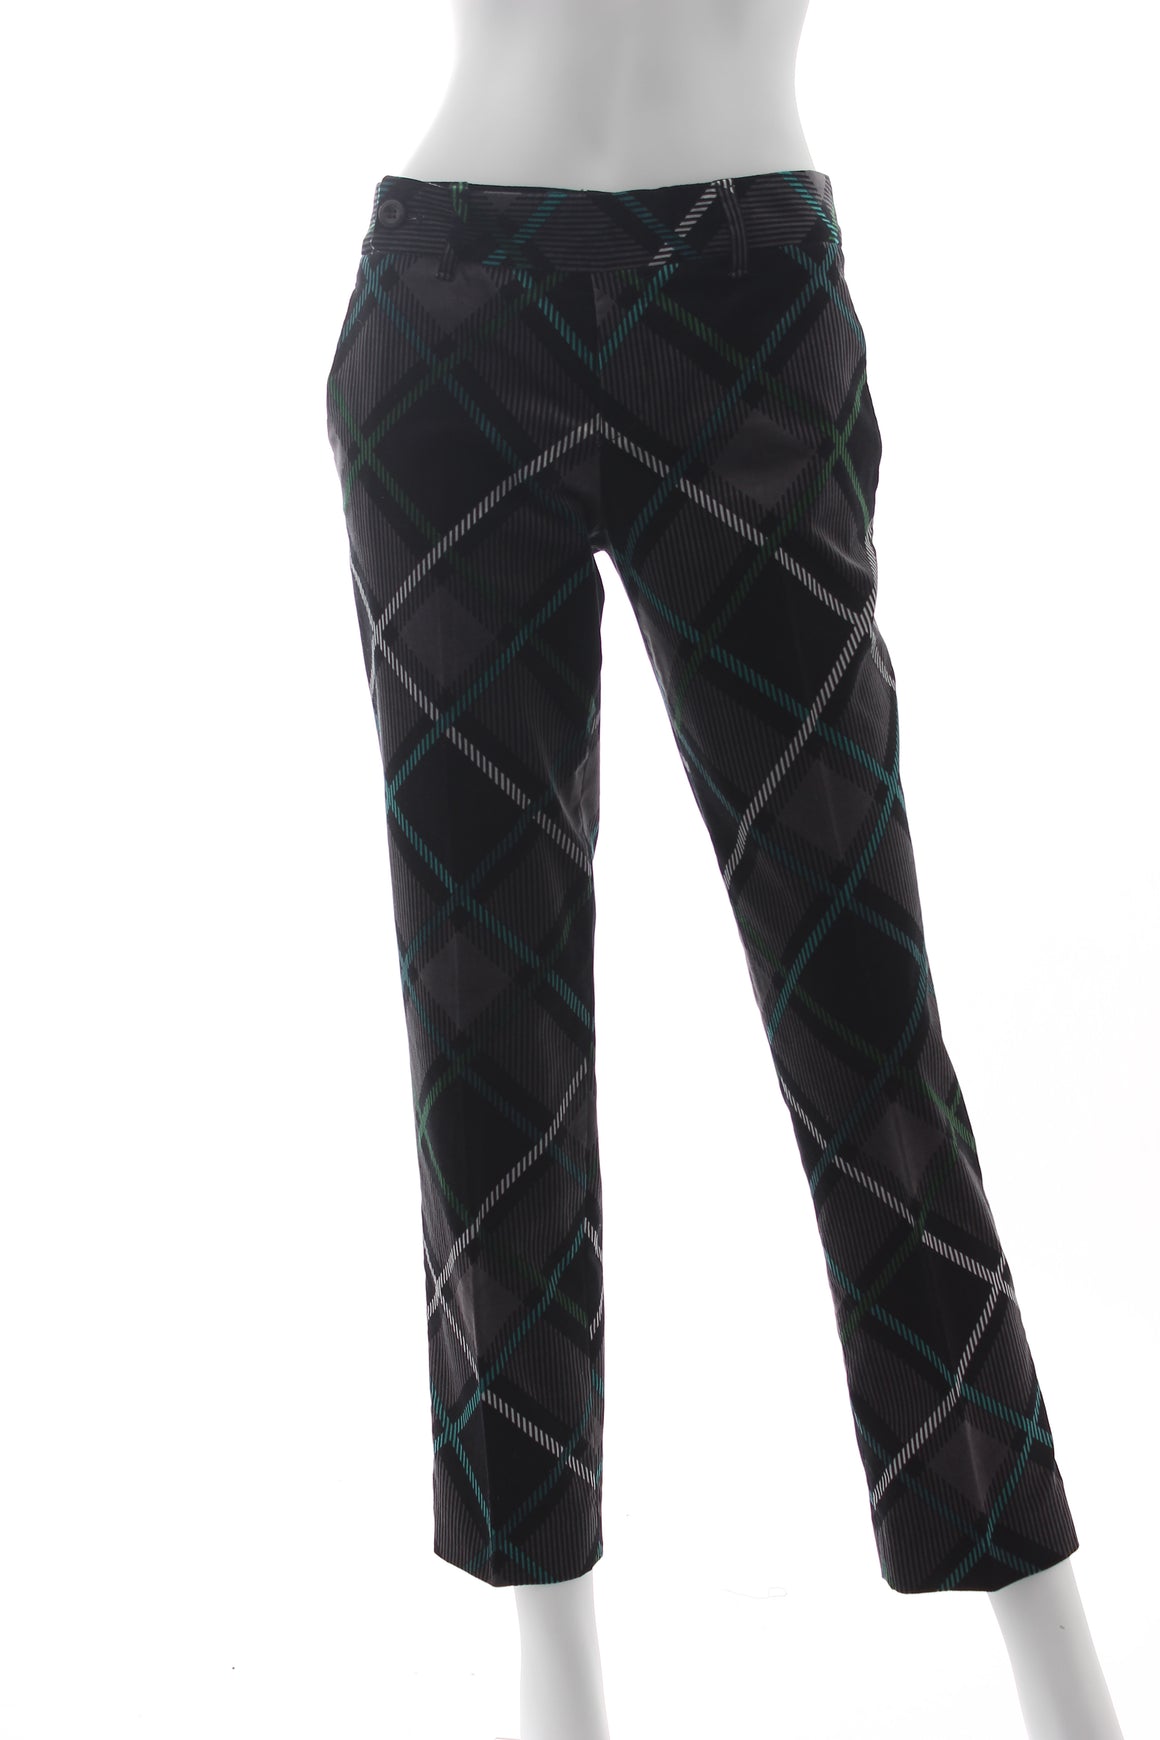 Gucci Velvet Checked Cropped Trousers